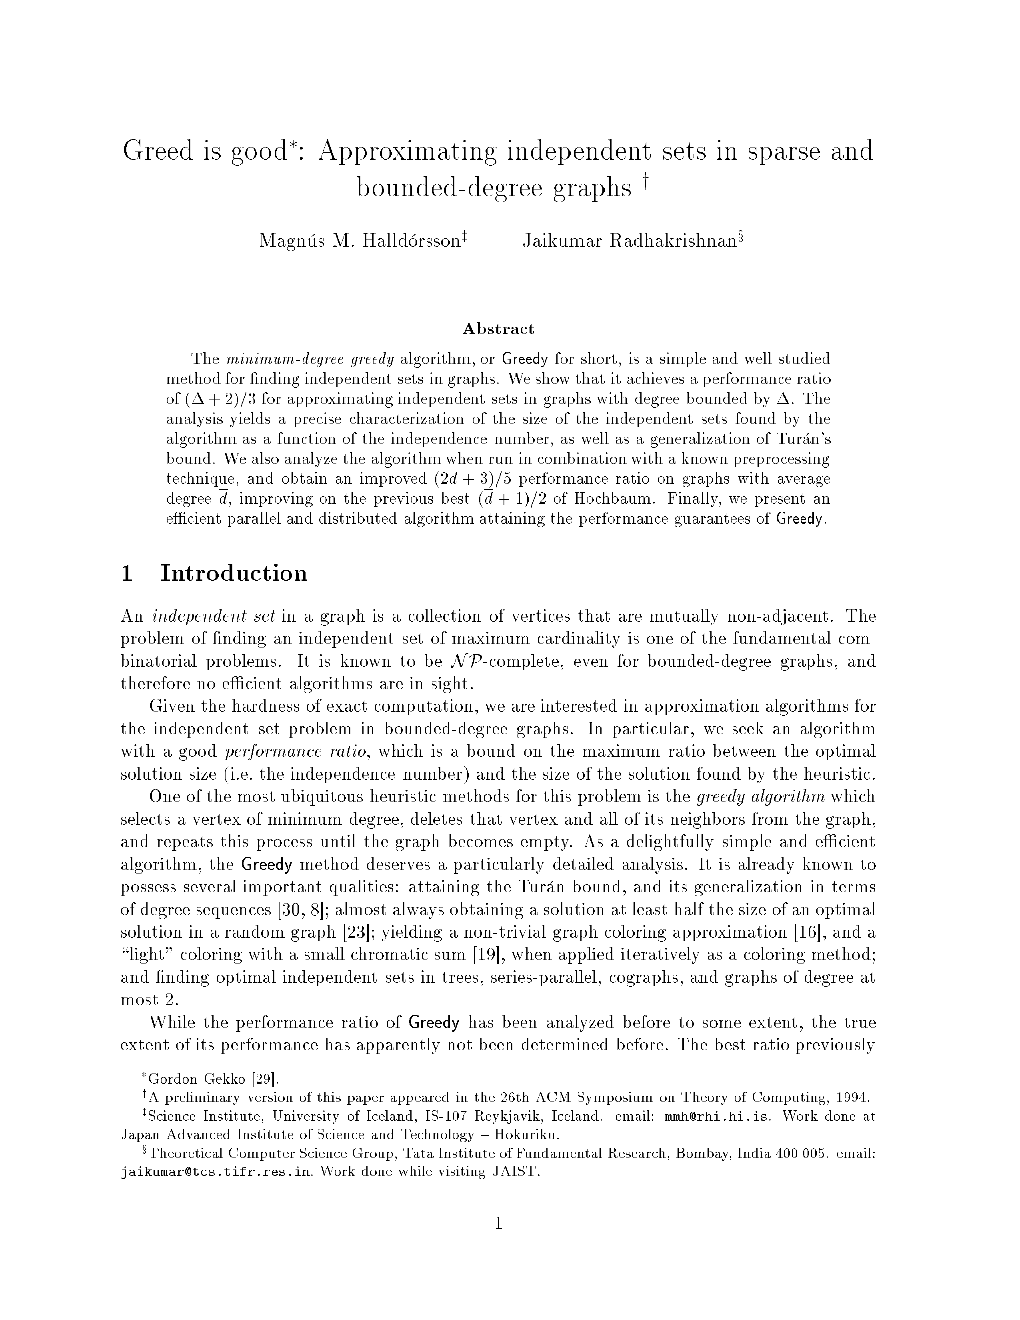 Greed Is Good : Approximating Independent Sets in Sparse and Bounded-Degree Graphs Y 1 Introduction